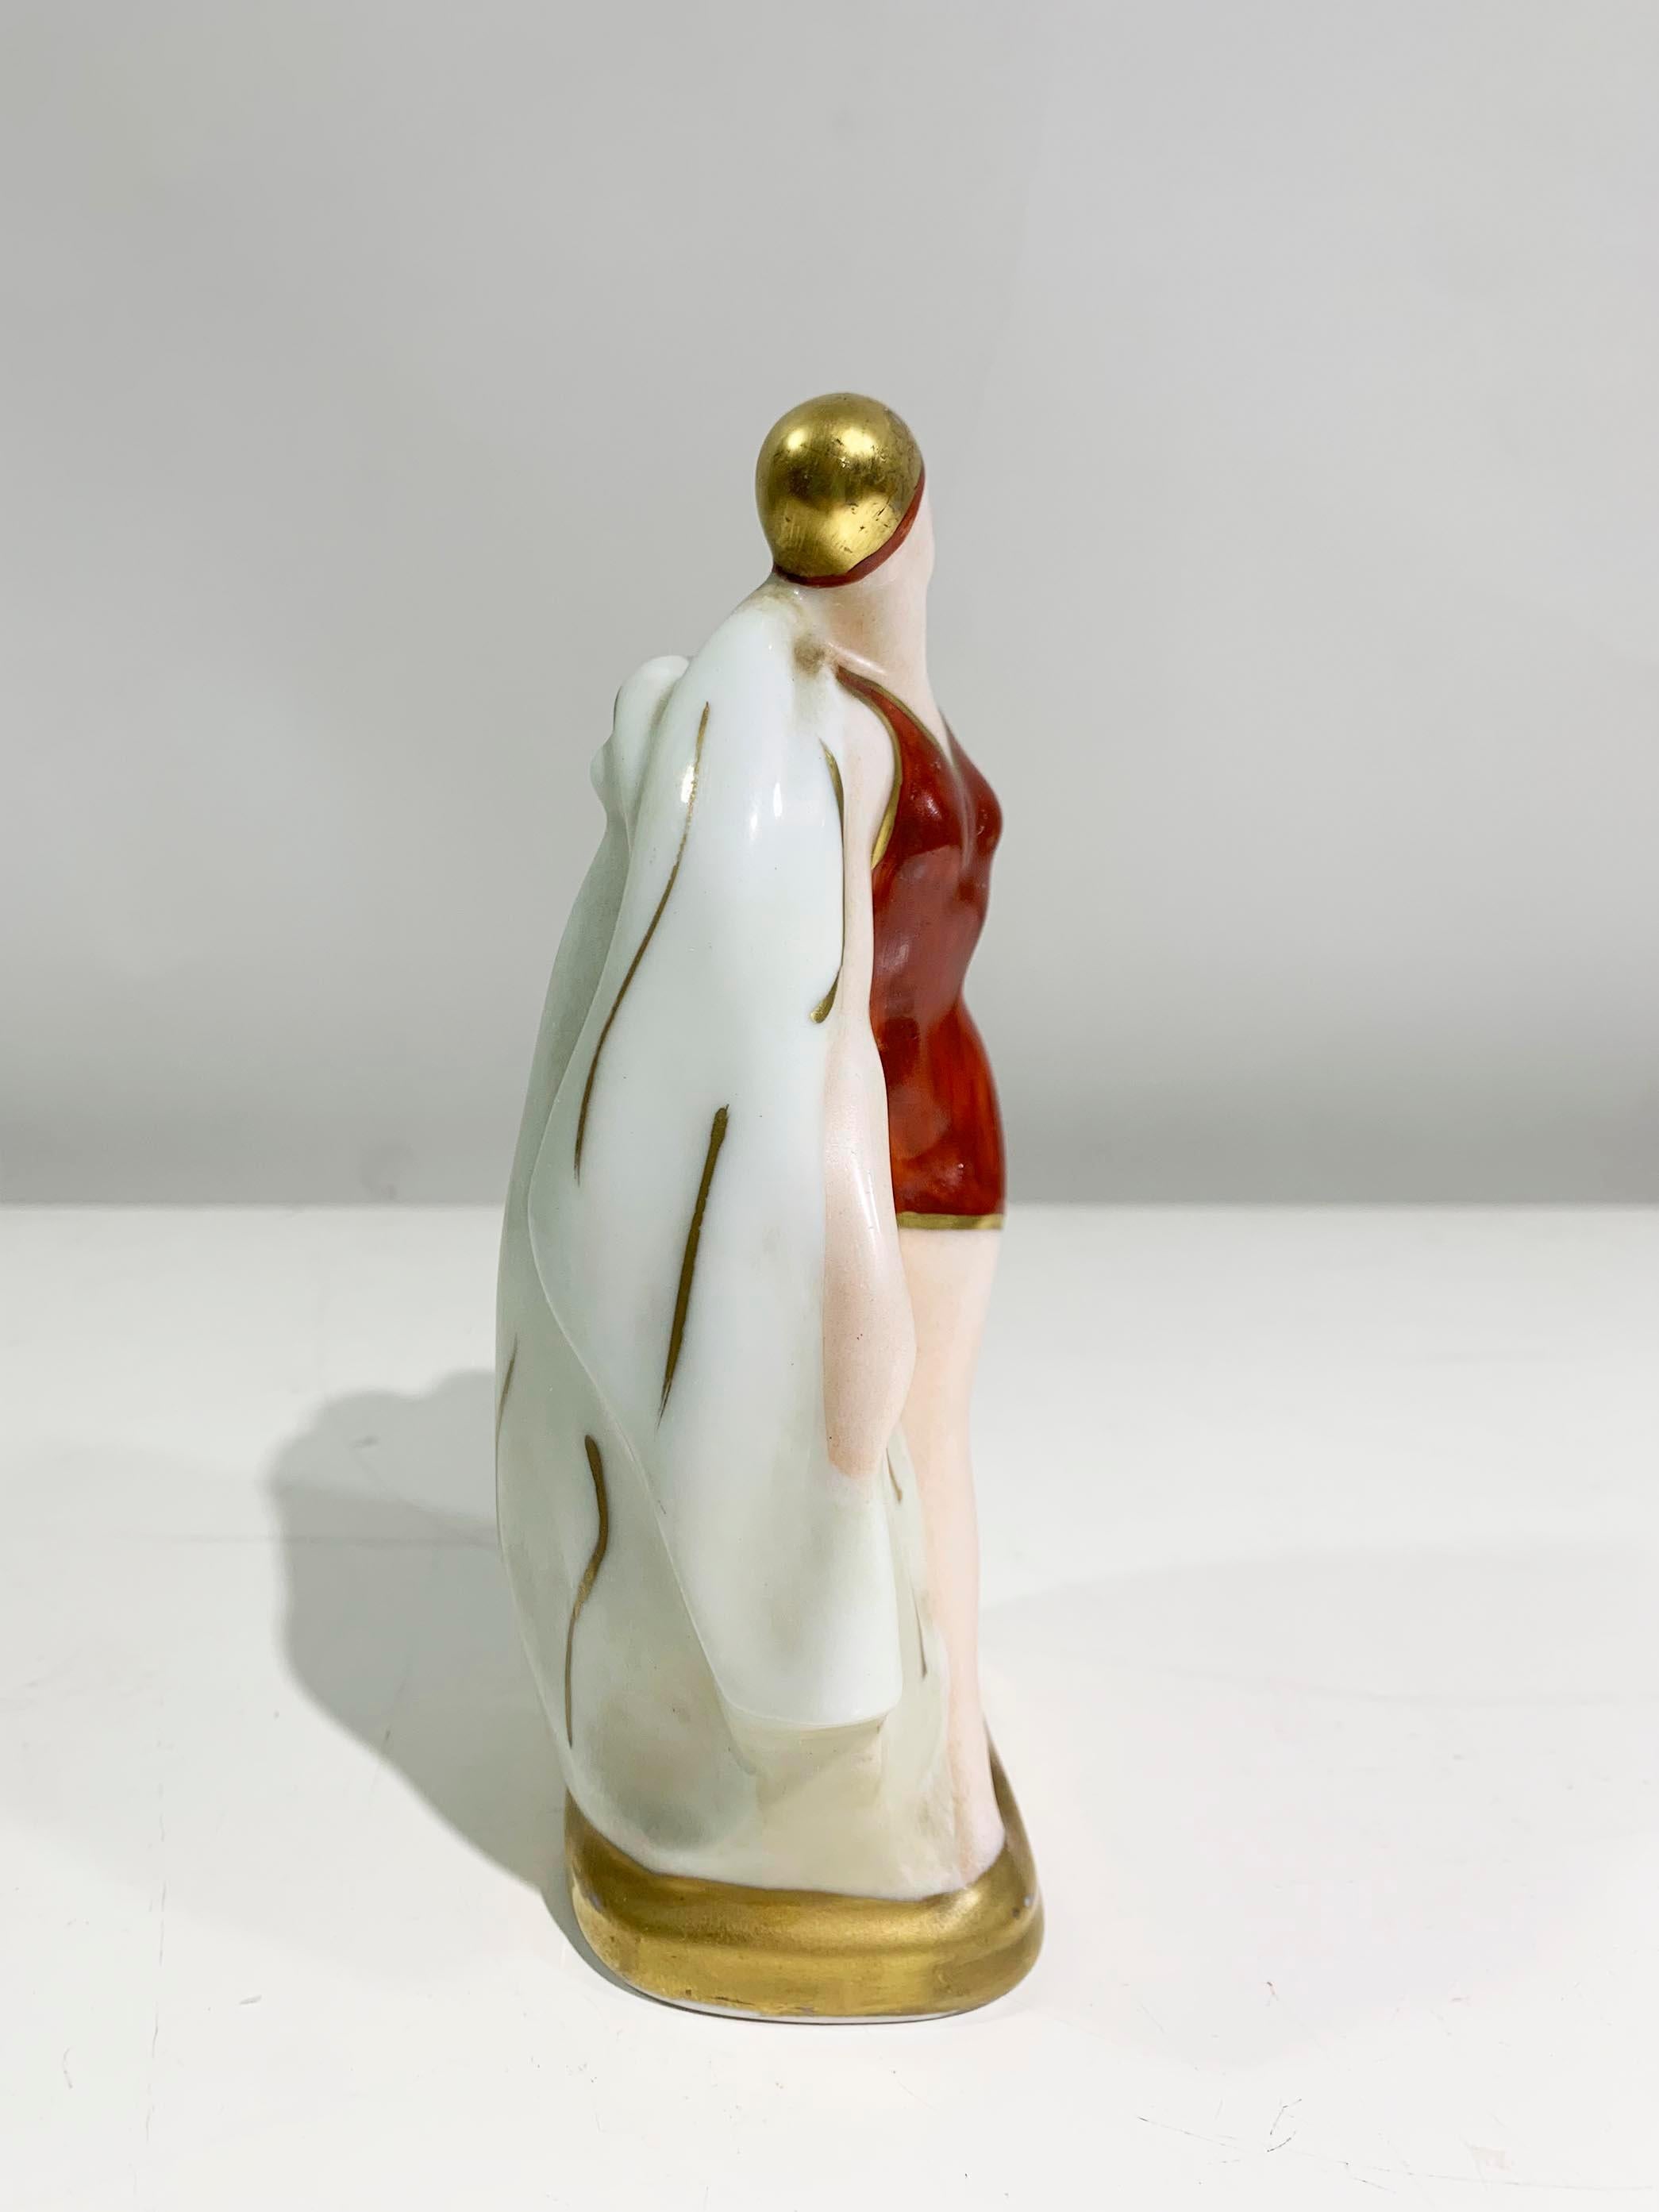 French Set of 2 Art Deco Porcelain Figurines Signed Amelin - Rauche / 